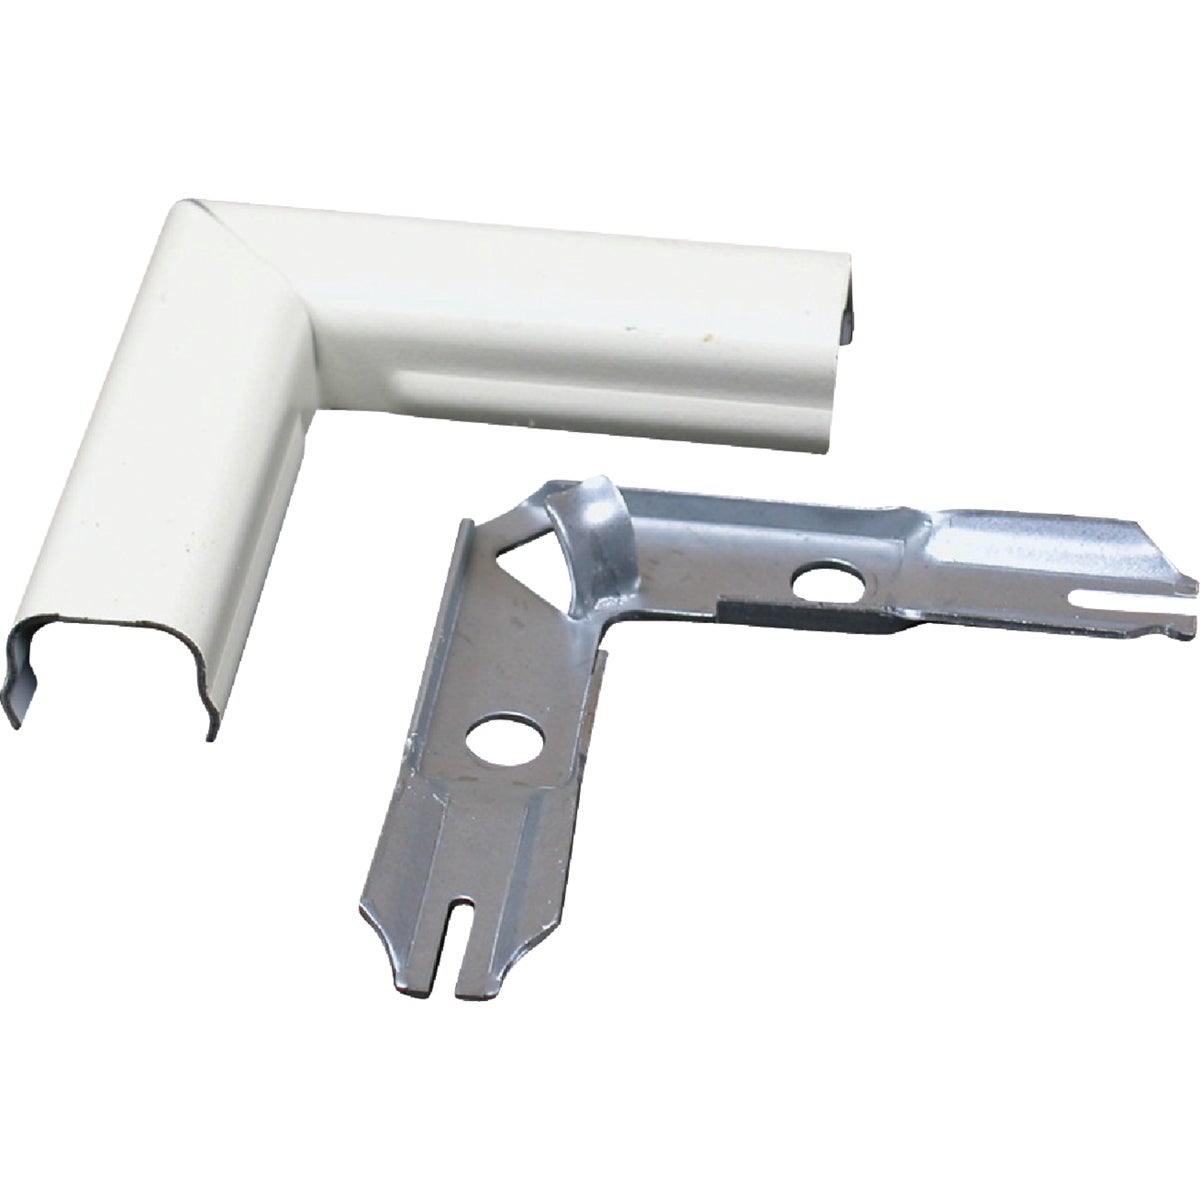 Item 501298, Flat elbow for making right or left hand turns on a flat surface.